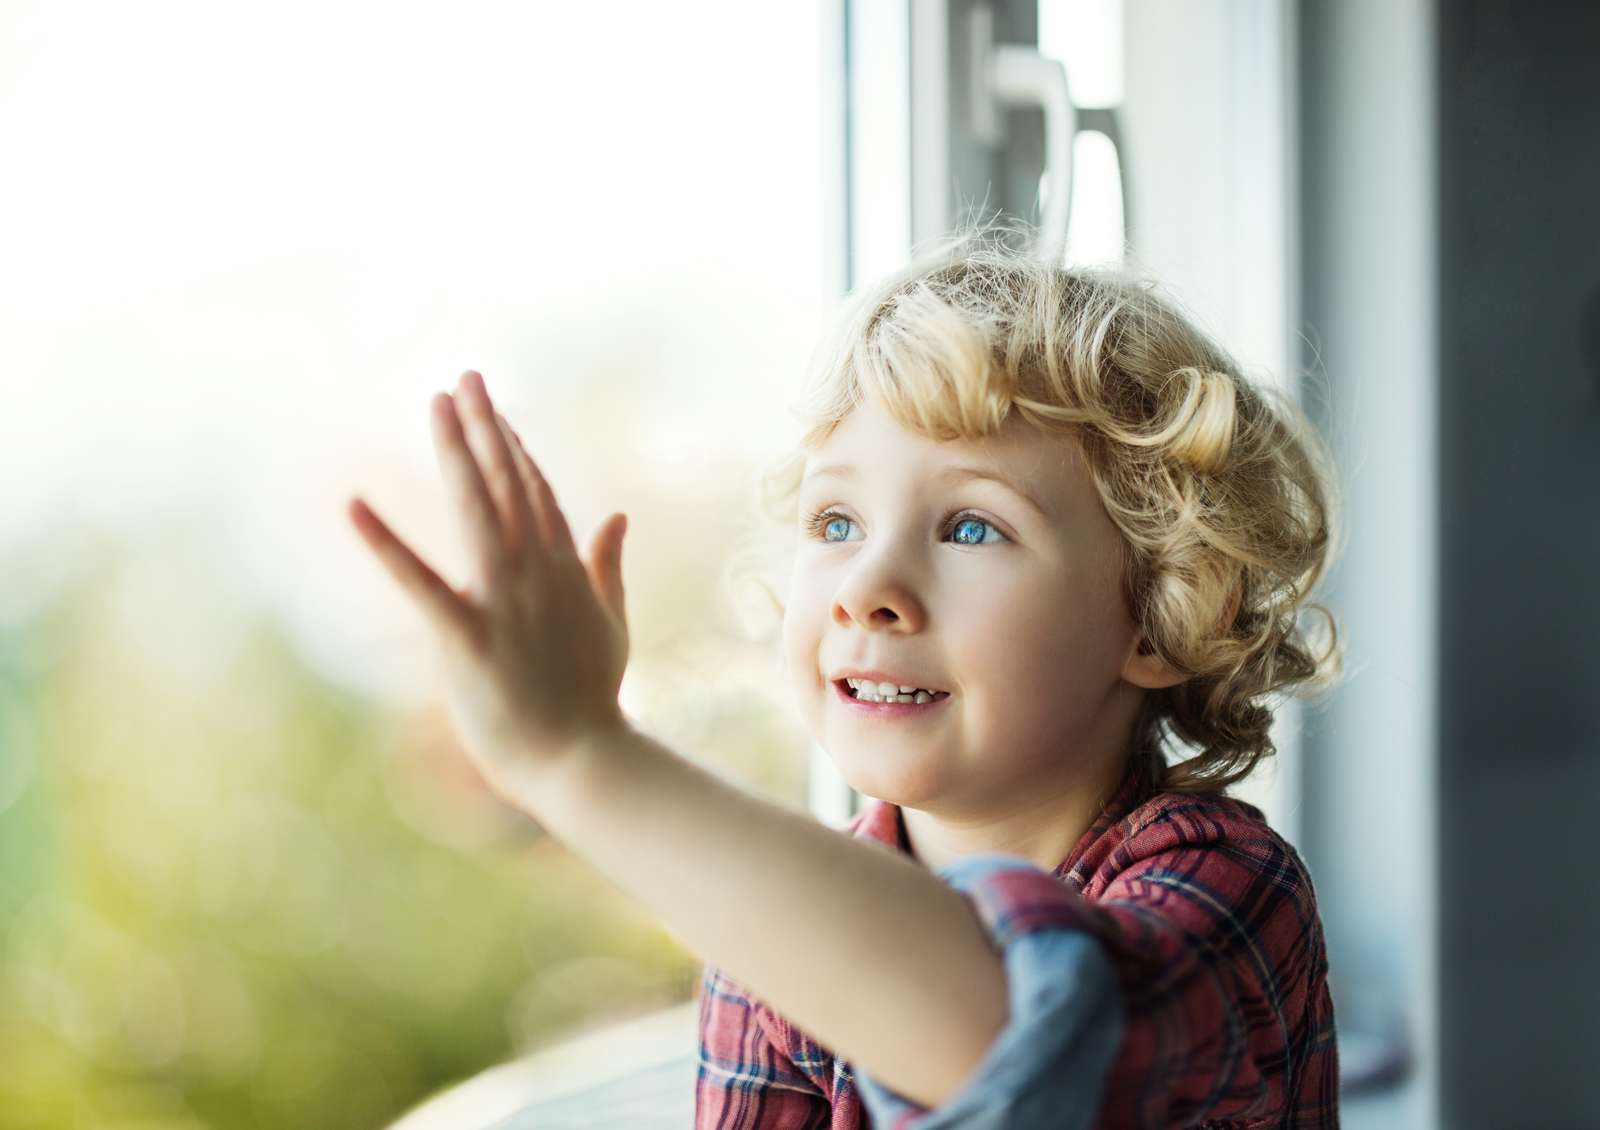 Adorable blond toddler girl looking out of the window